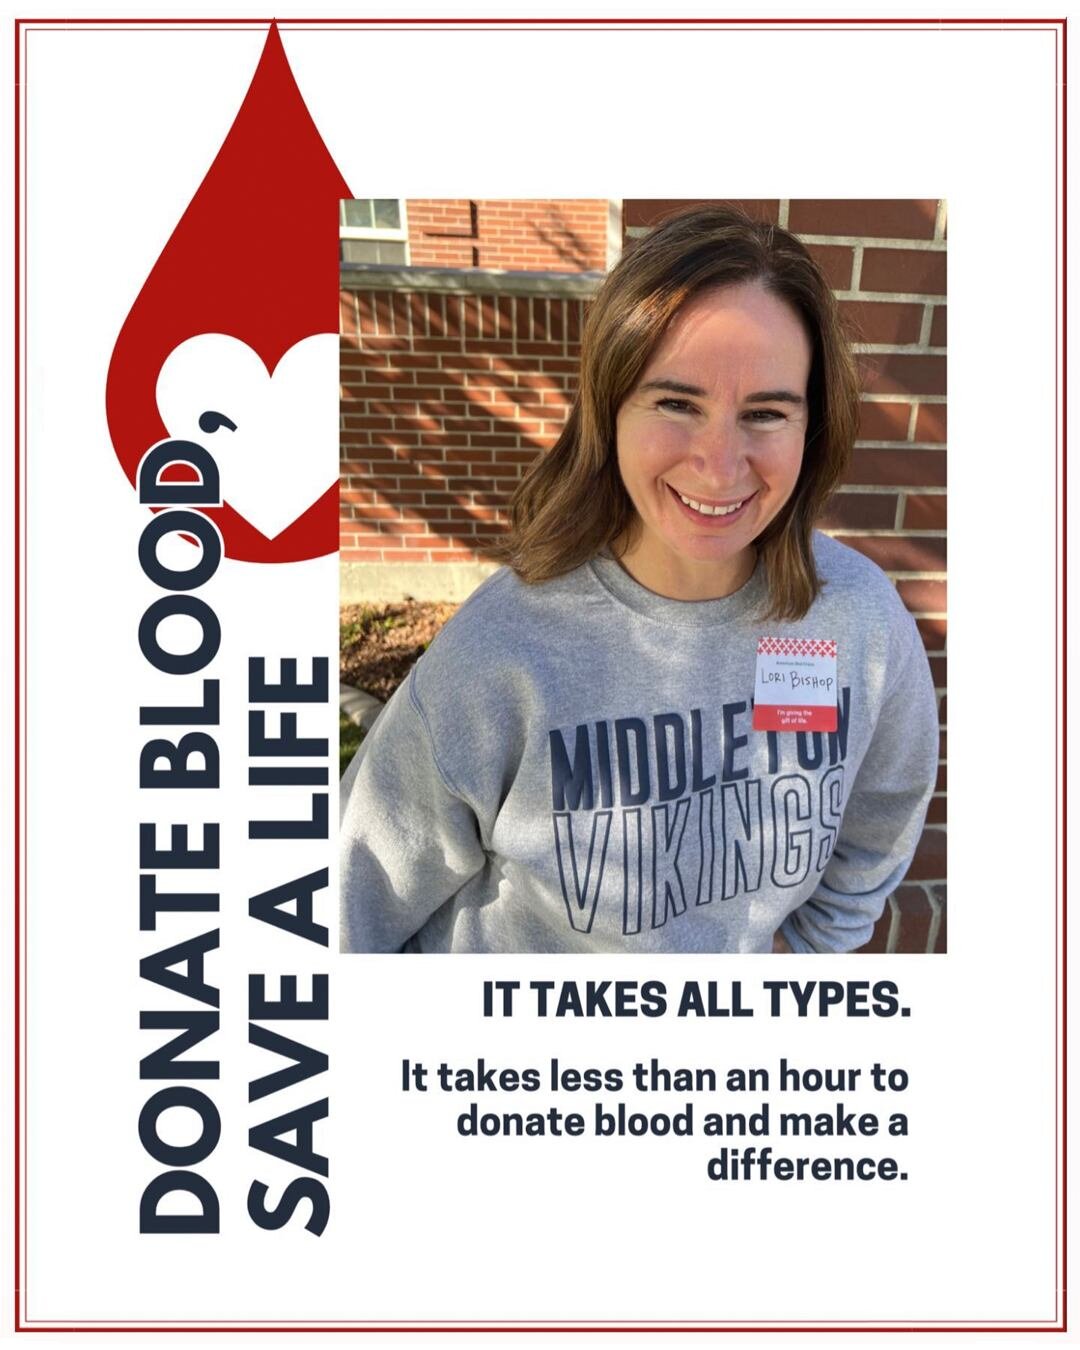 You can be the lifeline for those in need! Donating blood to the @RedCross not only supports emergency situations but also helps patients in ongoing medical treatments including cancer and surgeries. Every drop counts!